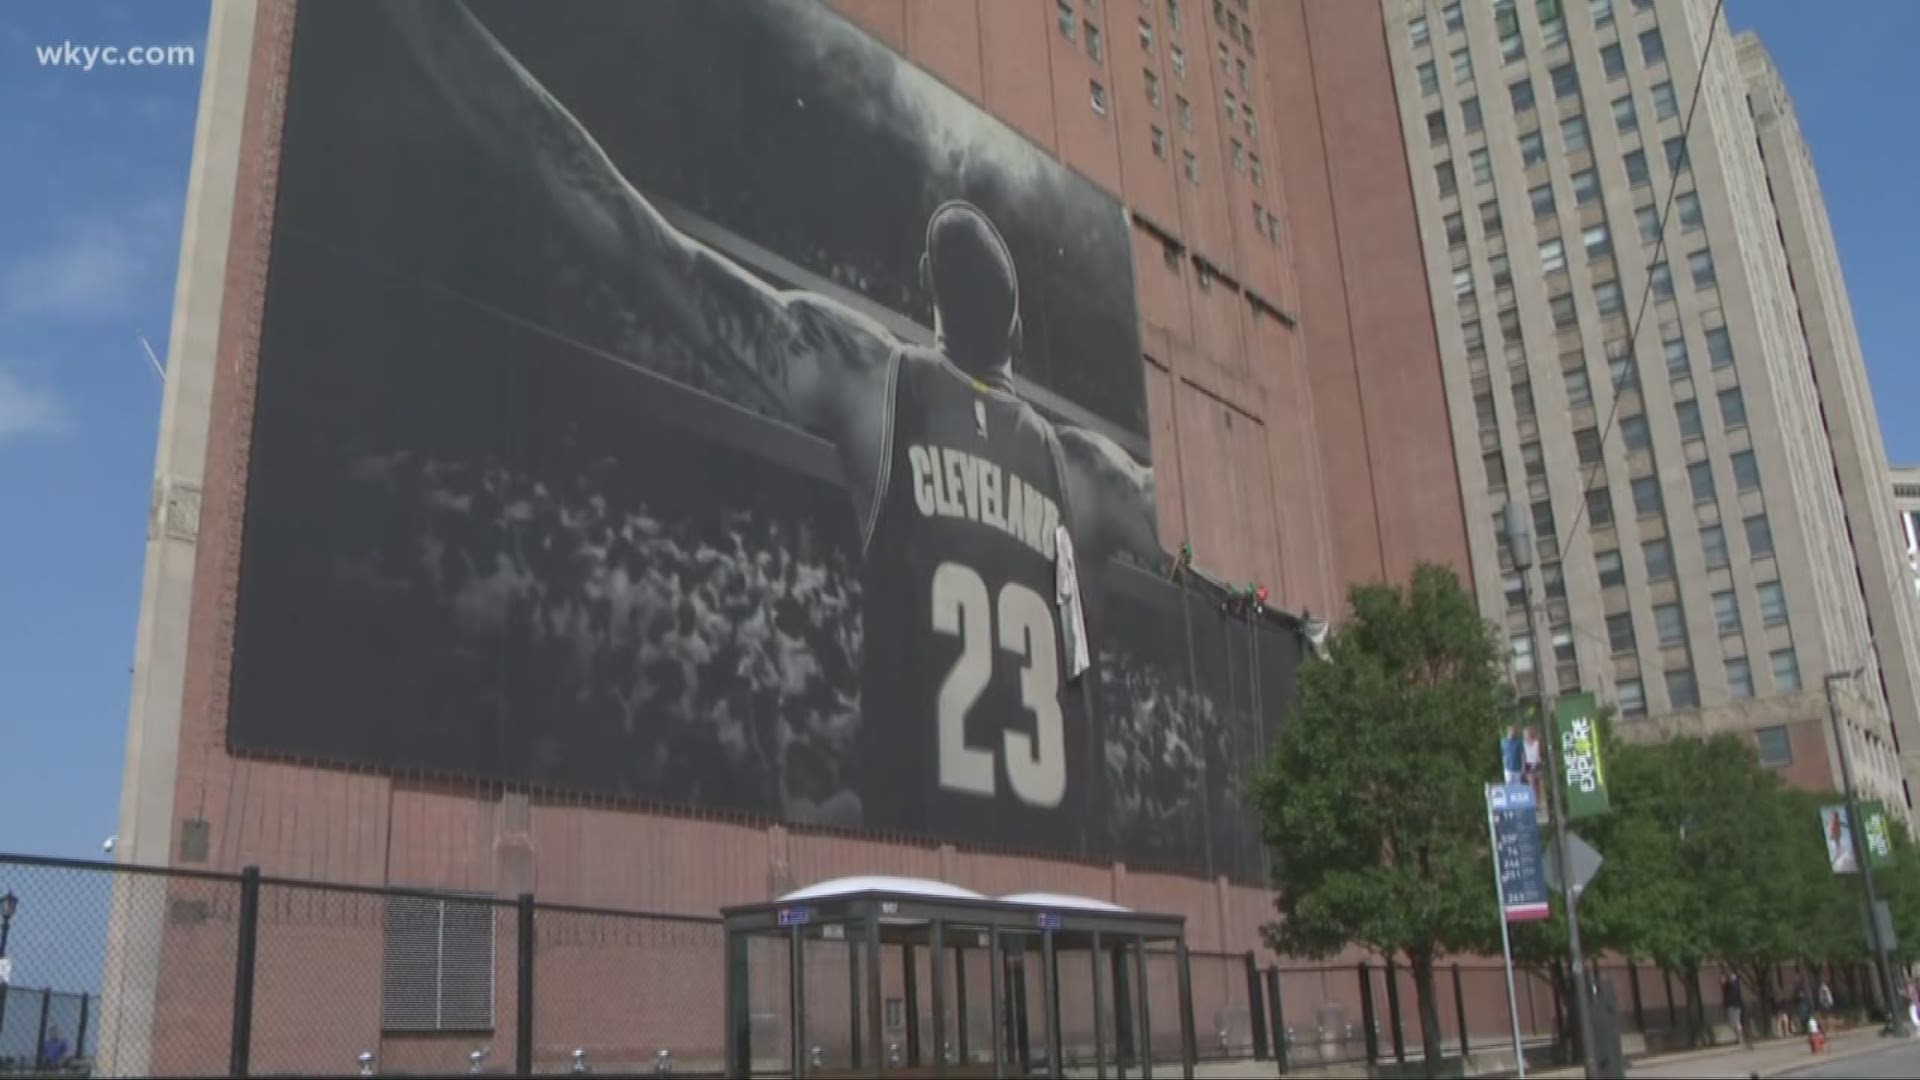 July 3, 2018: It's the end of an era... again. The iconic LeBron James banner is being removed after the NBA superstar chose to leave the Cleveland Cavaliers for the LA Lakers.